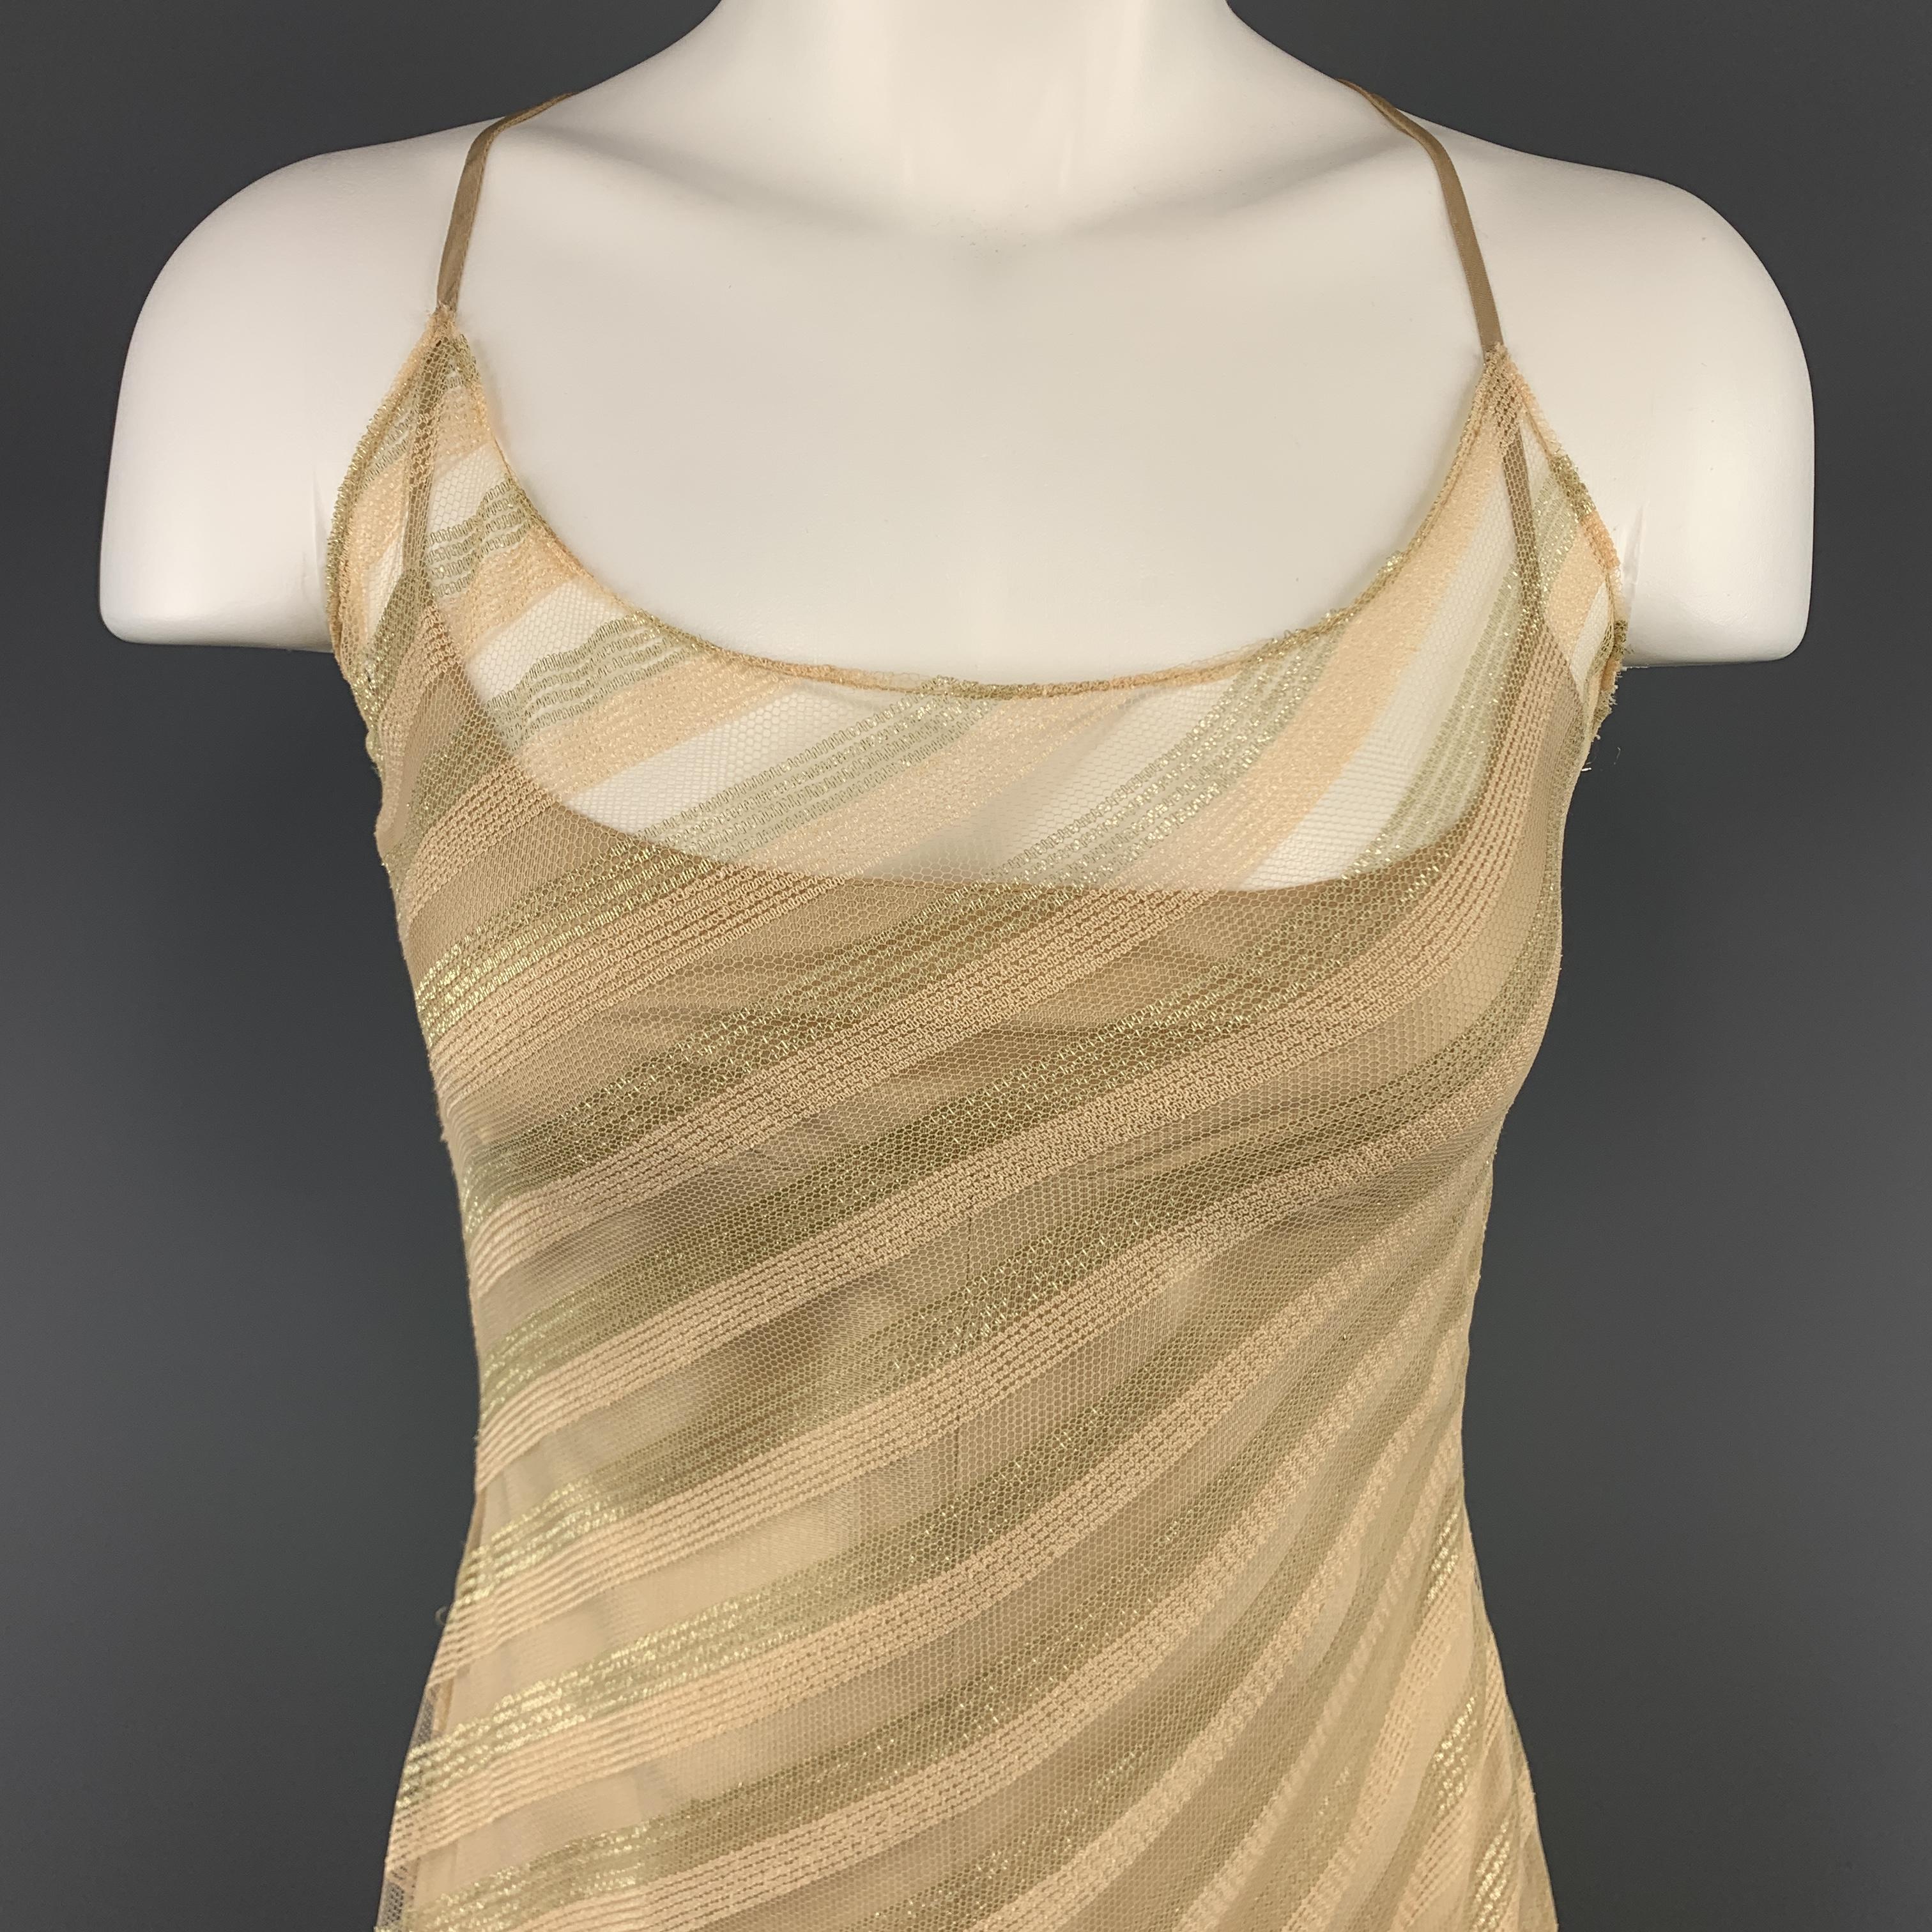 RICHARD TYLER slip style dress comes in beige silk chiffon with a metallic diagonal striped overlay and cross straps. Made in USA.

Excellent Pre-Owned Condition.
Marked: 6

Measurements:

Bust: 34 in.
Waist: 29 in.
Hip: 38 in.
Length: 44 in.